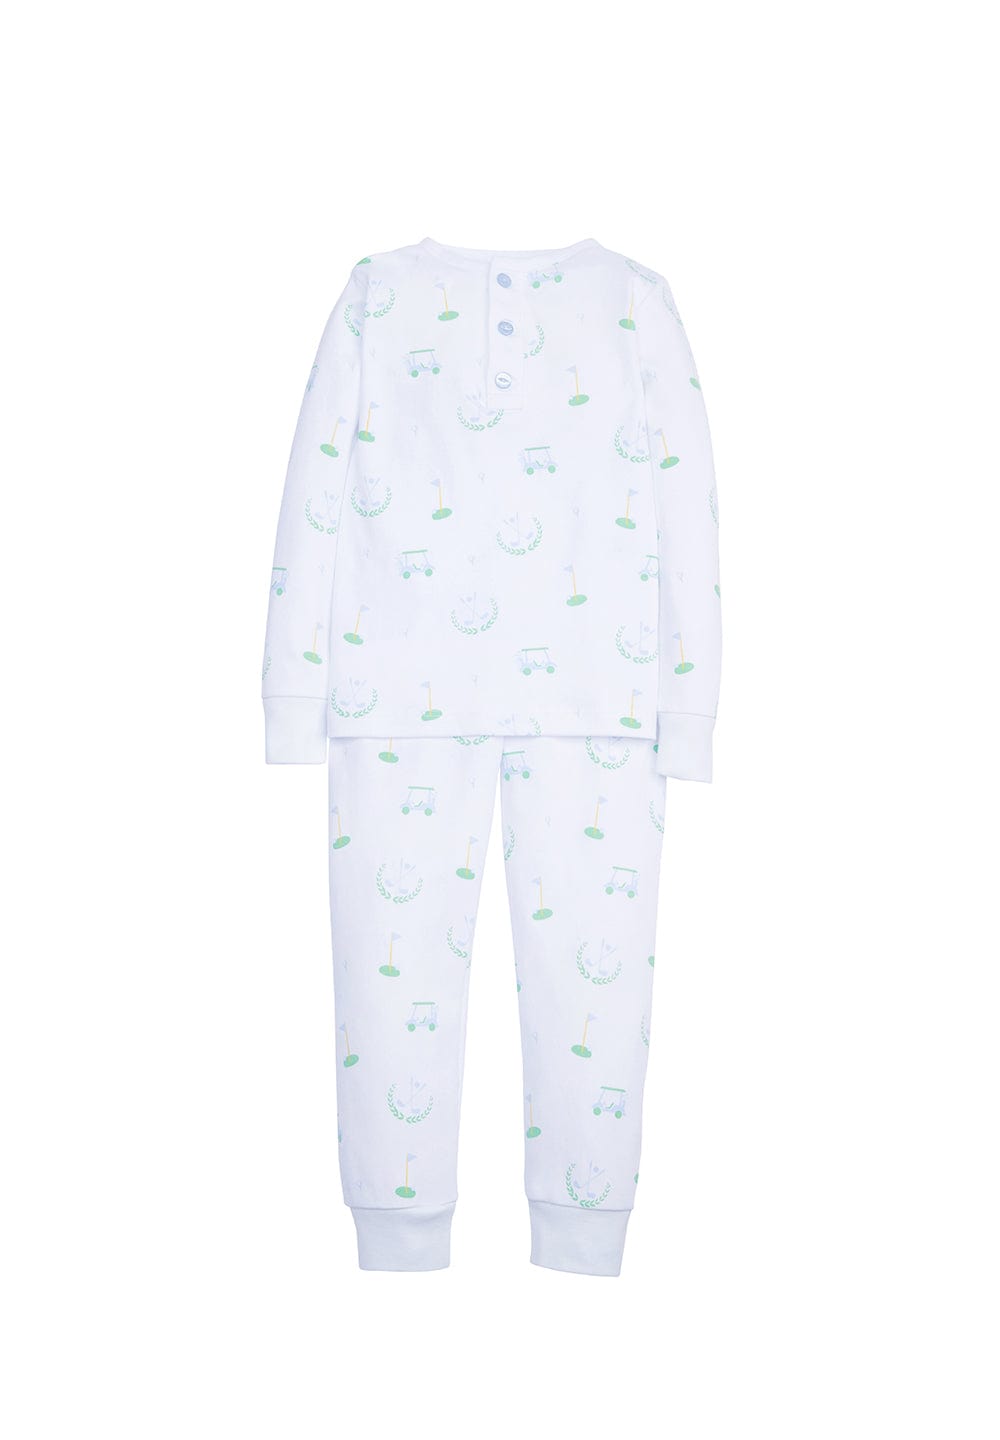 classic childrens clothing boys pajama set with golf pattern